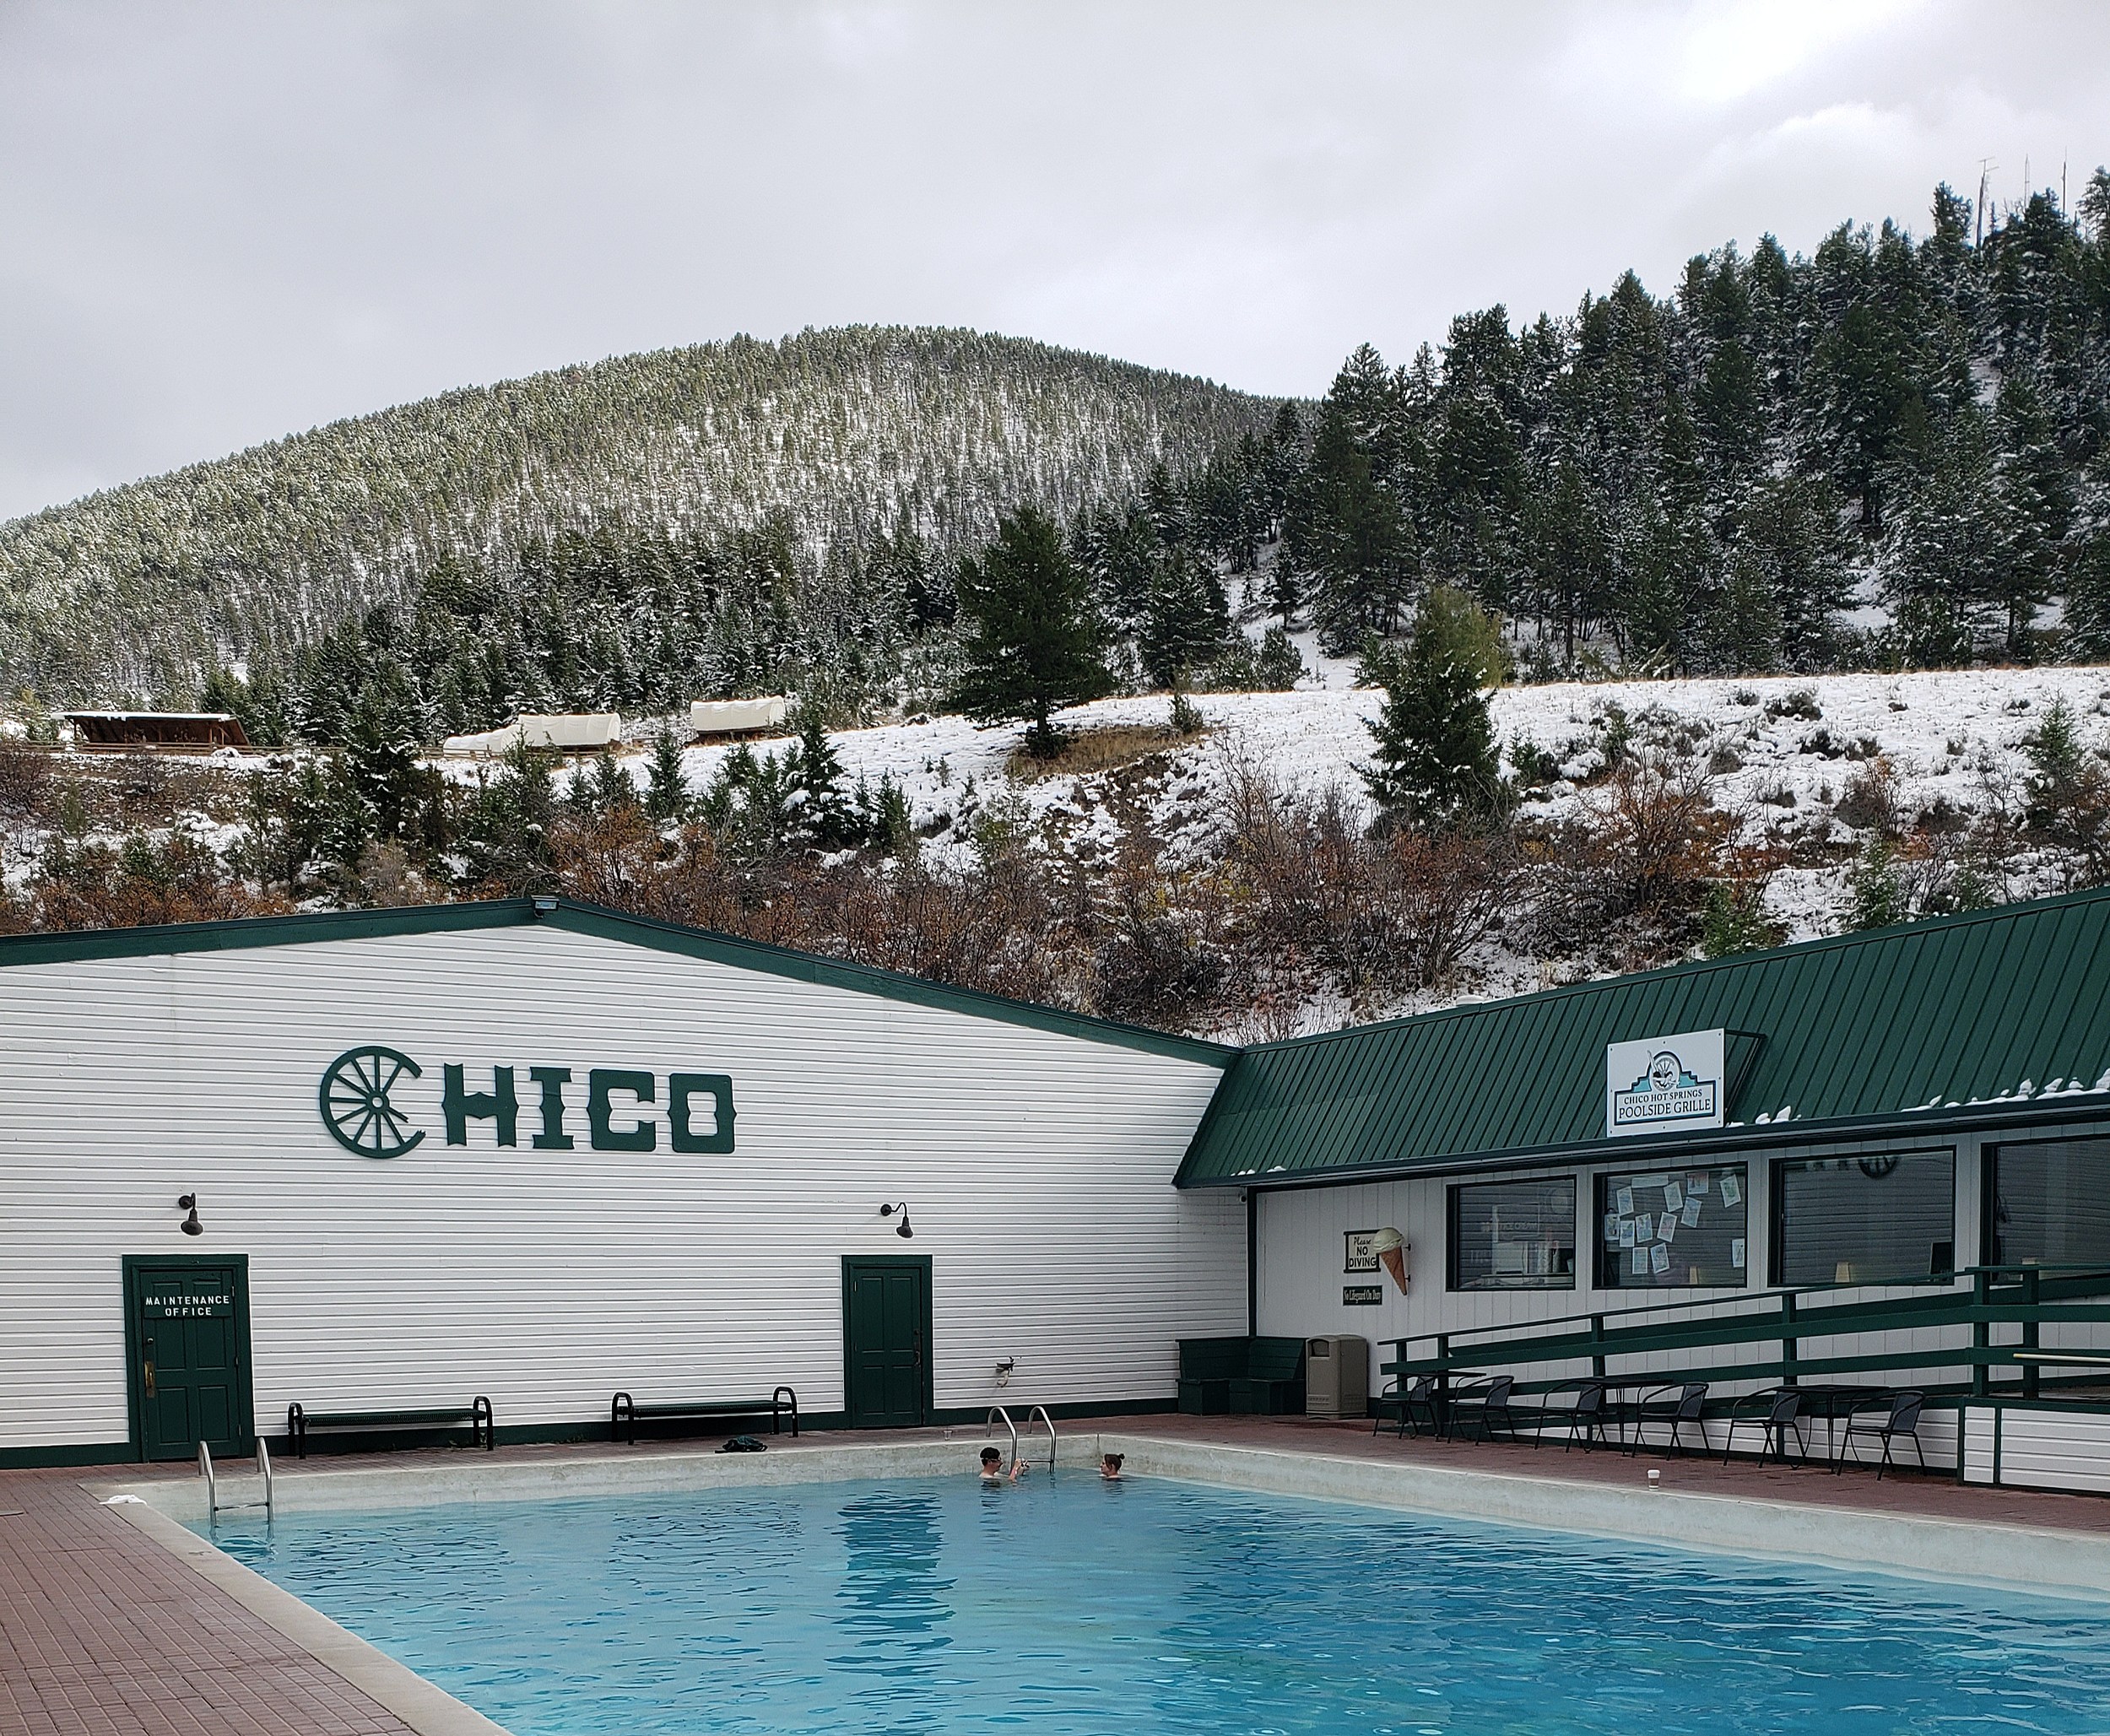 Food Bucket List: A Trip to Chico Hot Springs Delivers Big Flavor